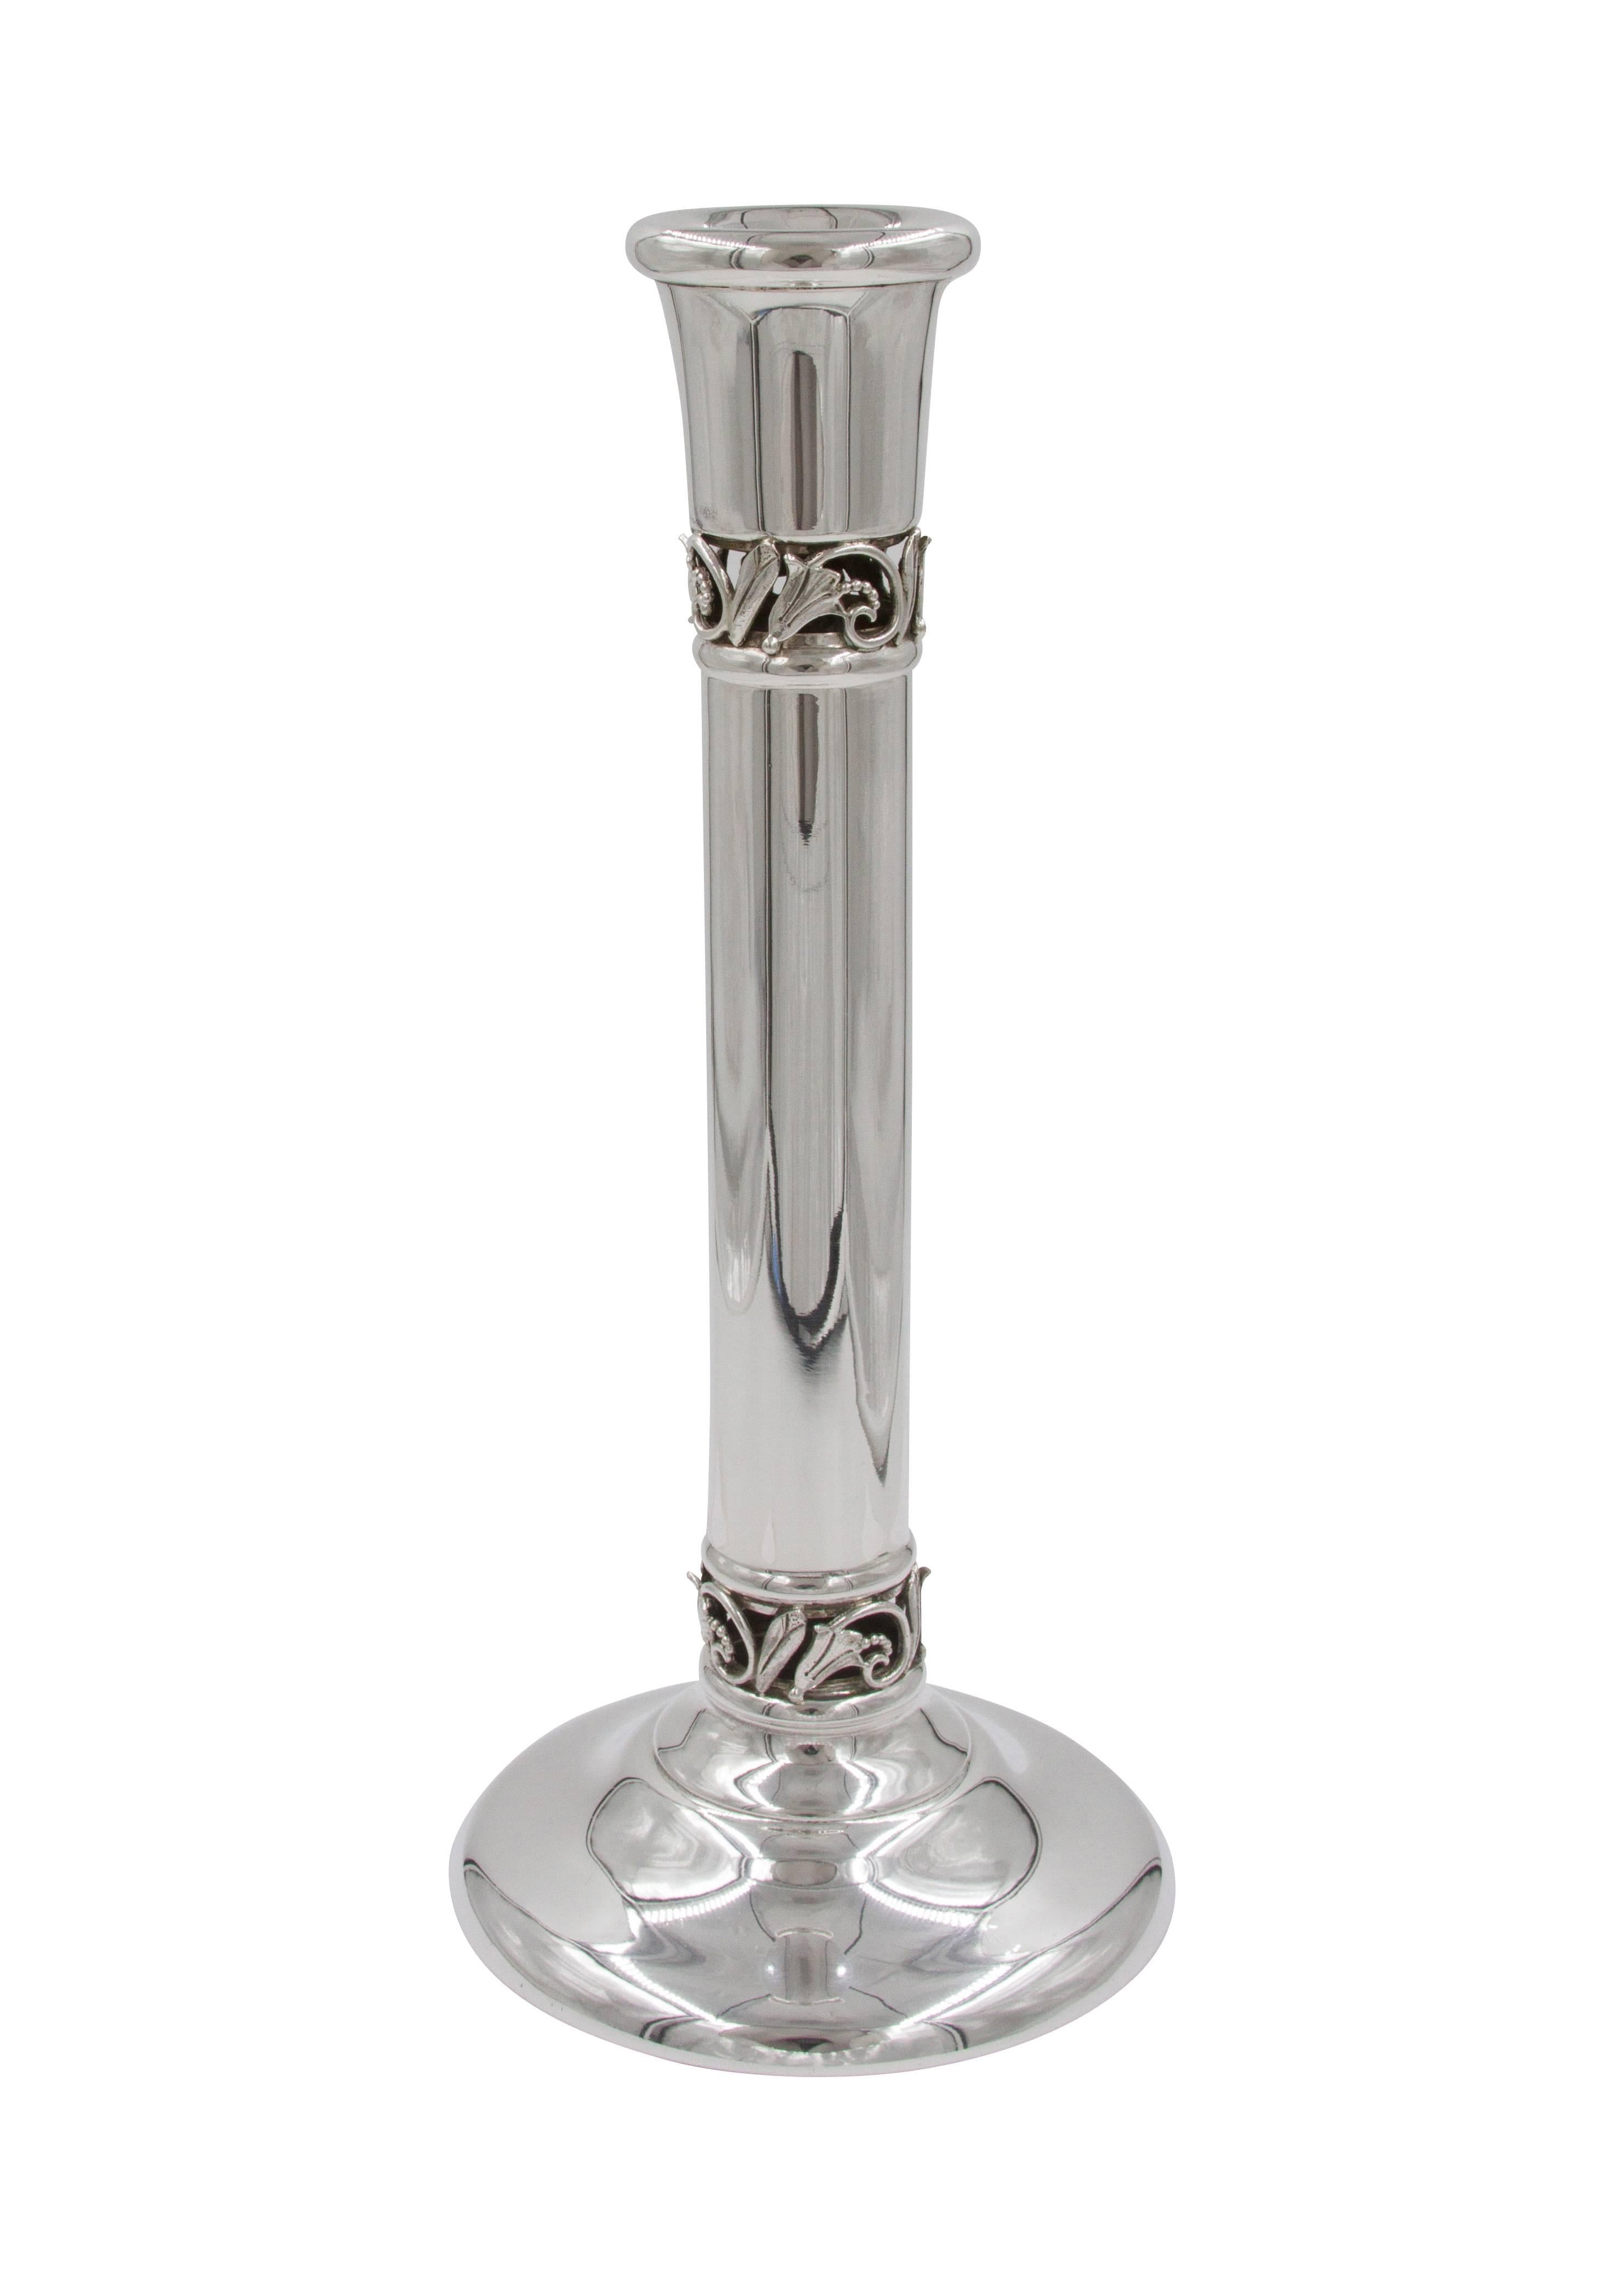 Sterling Silver Candlesticks with Matching Bowl